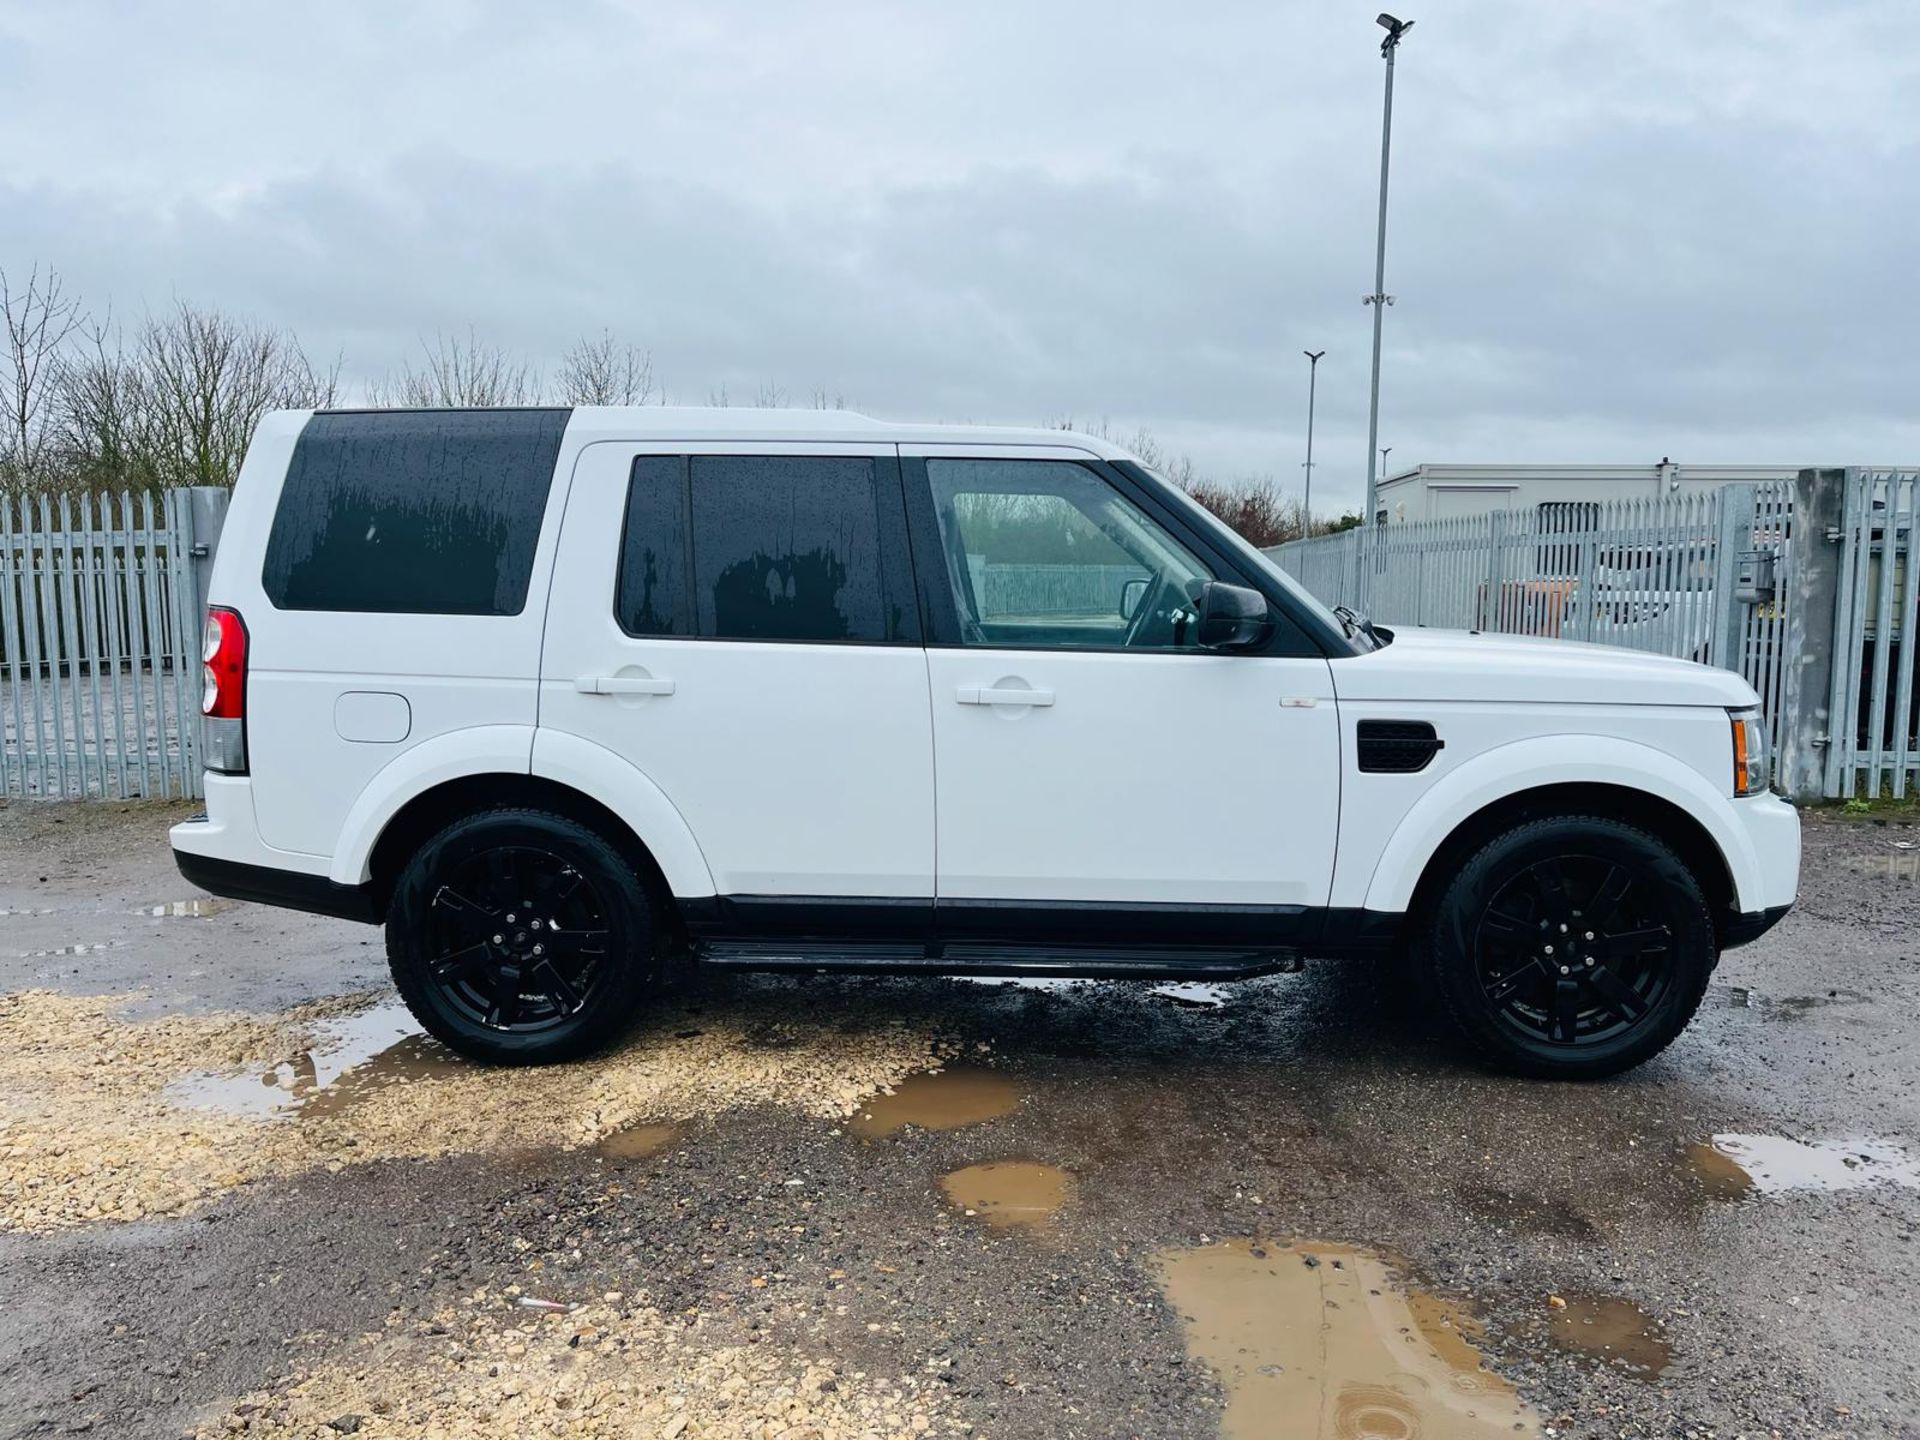 ** ON SALE ** Land Rover Discovery 4 255 SDV6 3.0 2012 '62 Reg' - Alloy Wheels - A/C - Tow Bar - Image 11 of 32